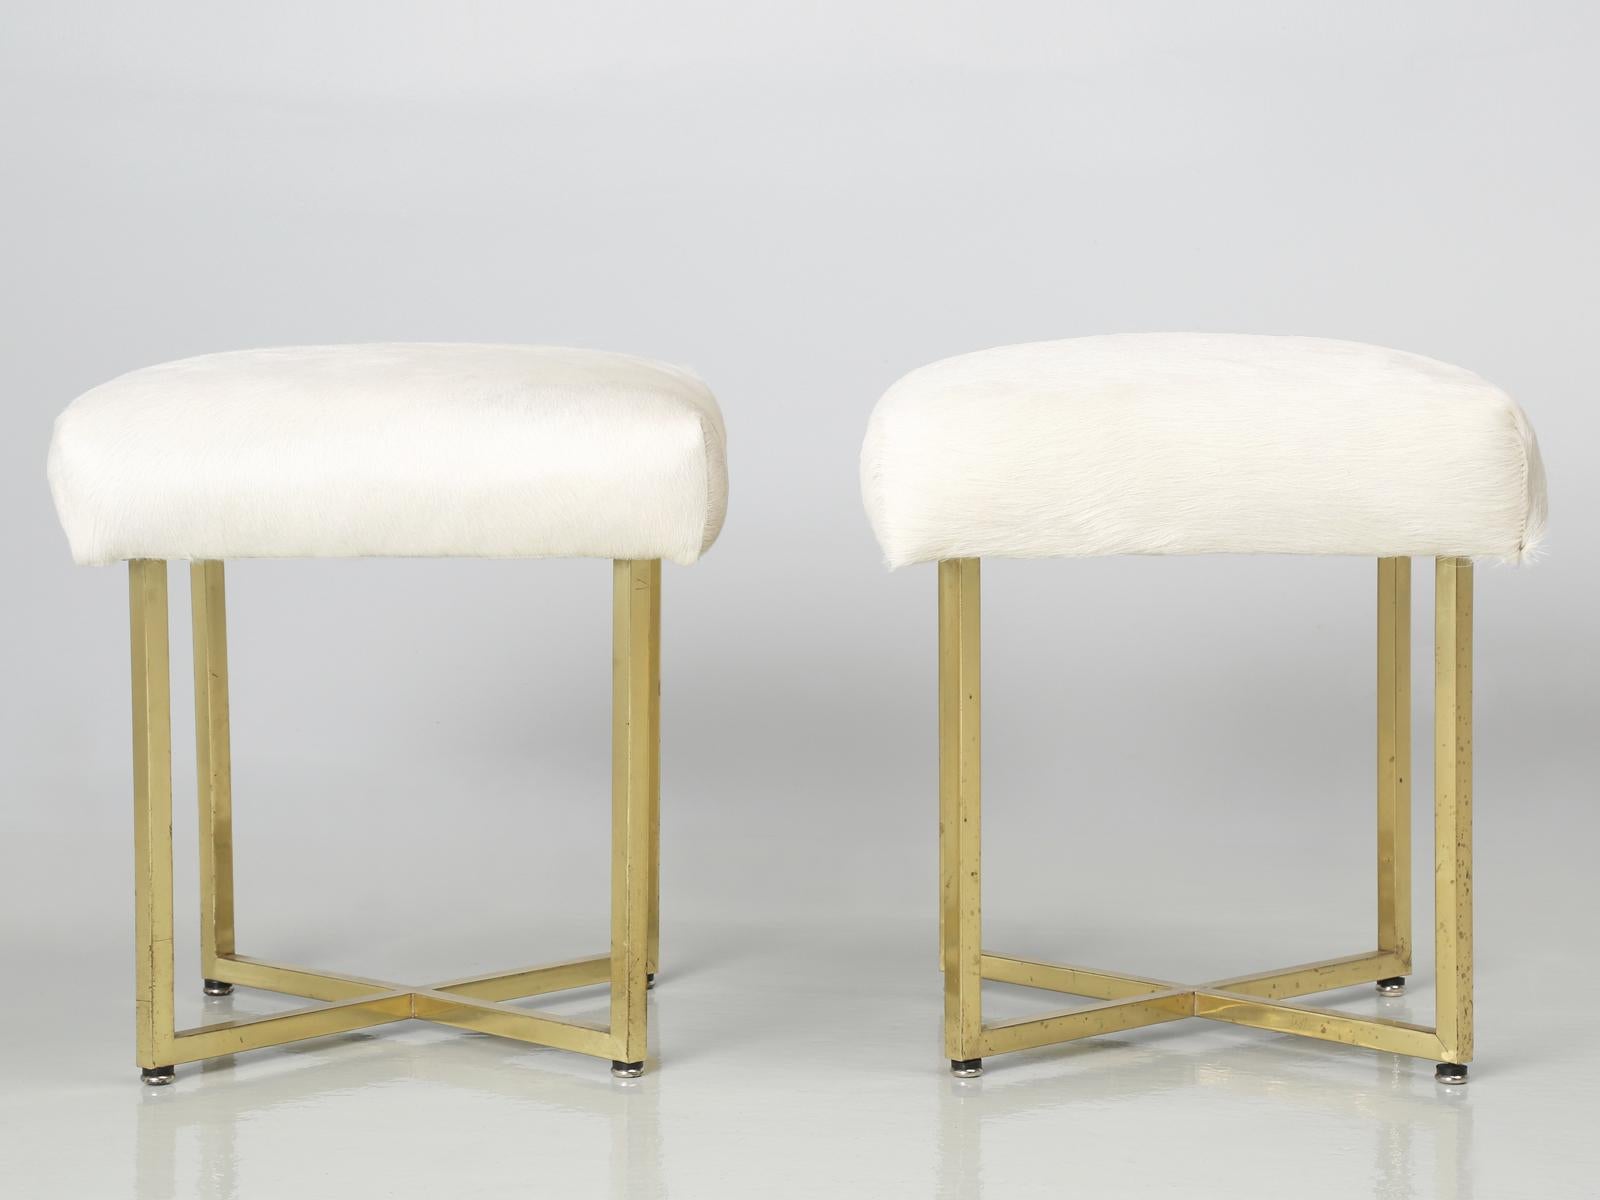 North American Pair of Vintage Brass Stools Attributed to Paul McCobb with Hair on Hide For Sale